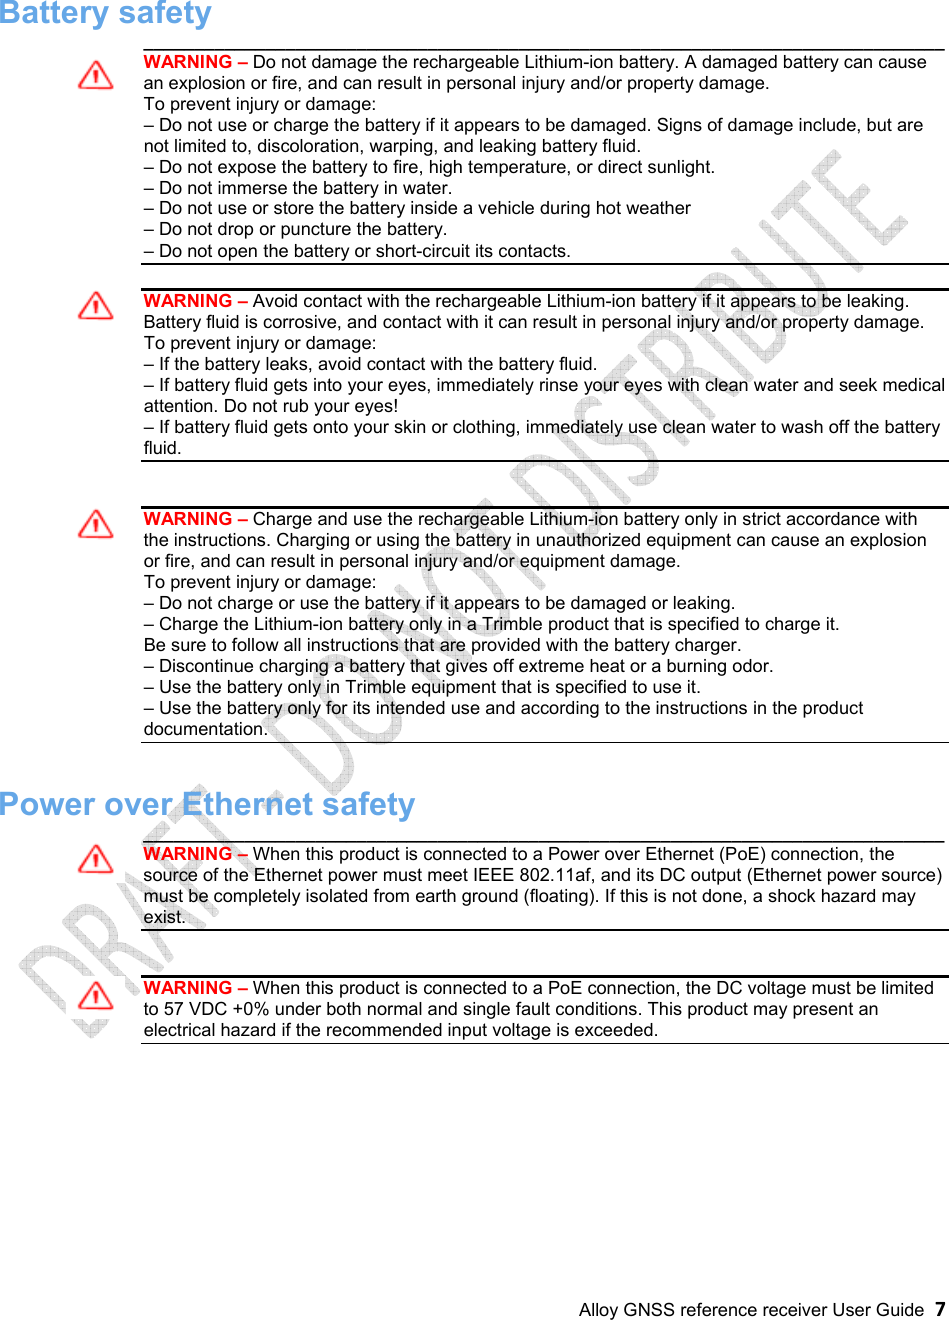 Alloy GNSS reference receiver User Guide  7 Battery safety _______________________________________________________________________________ WARNING – Do not damage the rechargeable Lithium-ion battery. A damaged battery can cause an explosion or fire, and can result in personal injury and/or property damage. To prevent injury or damage: – Do not use or charge the battery if it appears to be damaged. Signs of damage include, but arenot limited to, discoloration, warping, and leaking battery fluid. – Do not expose the battery to fire, high temperature, or direct sunlight.– Do not immerse the battery in water.– Do not use or store the battery inside a vehicle during hot weather– Do not drop or puncture the battery.– Do not open the battery or short-circuit its contacts.WARNING – Avoid contact with the rechargeable Lithium-ion battery if it appears to be leaking. Battery fluid is corrosive, and contact with it can result in personal injury and/or property damage. To prevent injury or damage: – If the battery leaks, avoid contact with the battery fluid.– If battery fluid gets into your eyes, immediately rinse your eyes with clean water and seek medicalattention. Do not rub your eyes! – If battery fluid gets onto your skin or clothing, immediately use clean water to wash off the batteryfluid. WARNING – Charge and use the rechargeable Lithium-ion battery only in strict accordance with the instructions. Charging or using the battery in unauthorized equipment can cause an explosion or fire, and can result in personal injury and/or equipment damage. To prevent injury or damage: – Do not charge or use the battery if it appears to be damaged or leaking.– Charge the Lithium-ion battery only in a Trimble product that is specified to charge it.Be sure to follow all instructions that are provided with the battery charger. – Discontinue charging a battery that gives off extreme heat or a burning odor.– Use the battery only in Trimble equipment that is specified to use it.– Use the battery only for its intended use and according to the instructions in the productdocumentation. Power over Ethernet safety _______________________________________________________________________________ WARNING – When this product is connected to a Power over Ethernet (PoE) connection, the source of the Ethernet power must meet IEEE 802.11af, and its DC output (Ethernet power source) must be completely isolated from earth ground (floating). If this is not done, a shock hazard may exist. WARNING – When this product is connected to a PoE connection, the DC voltage must be limited to 57 VDC +0% under both normal and single fault conditions. This product may present an electrical hazard if the recommended input voltage is exceeded. 